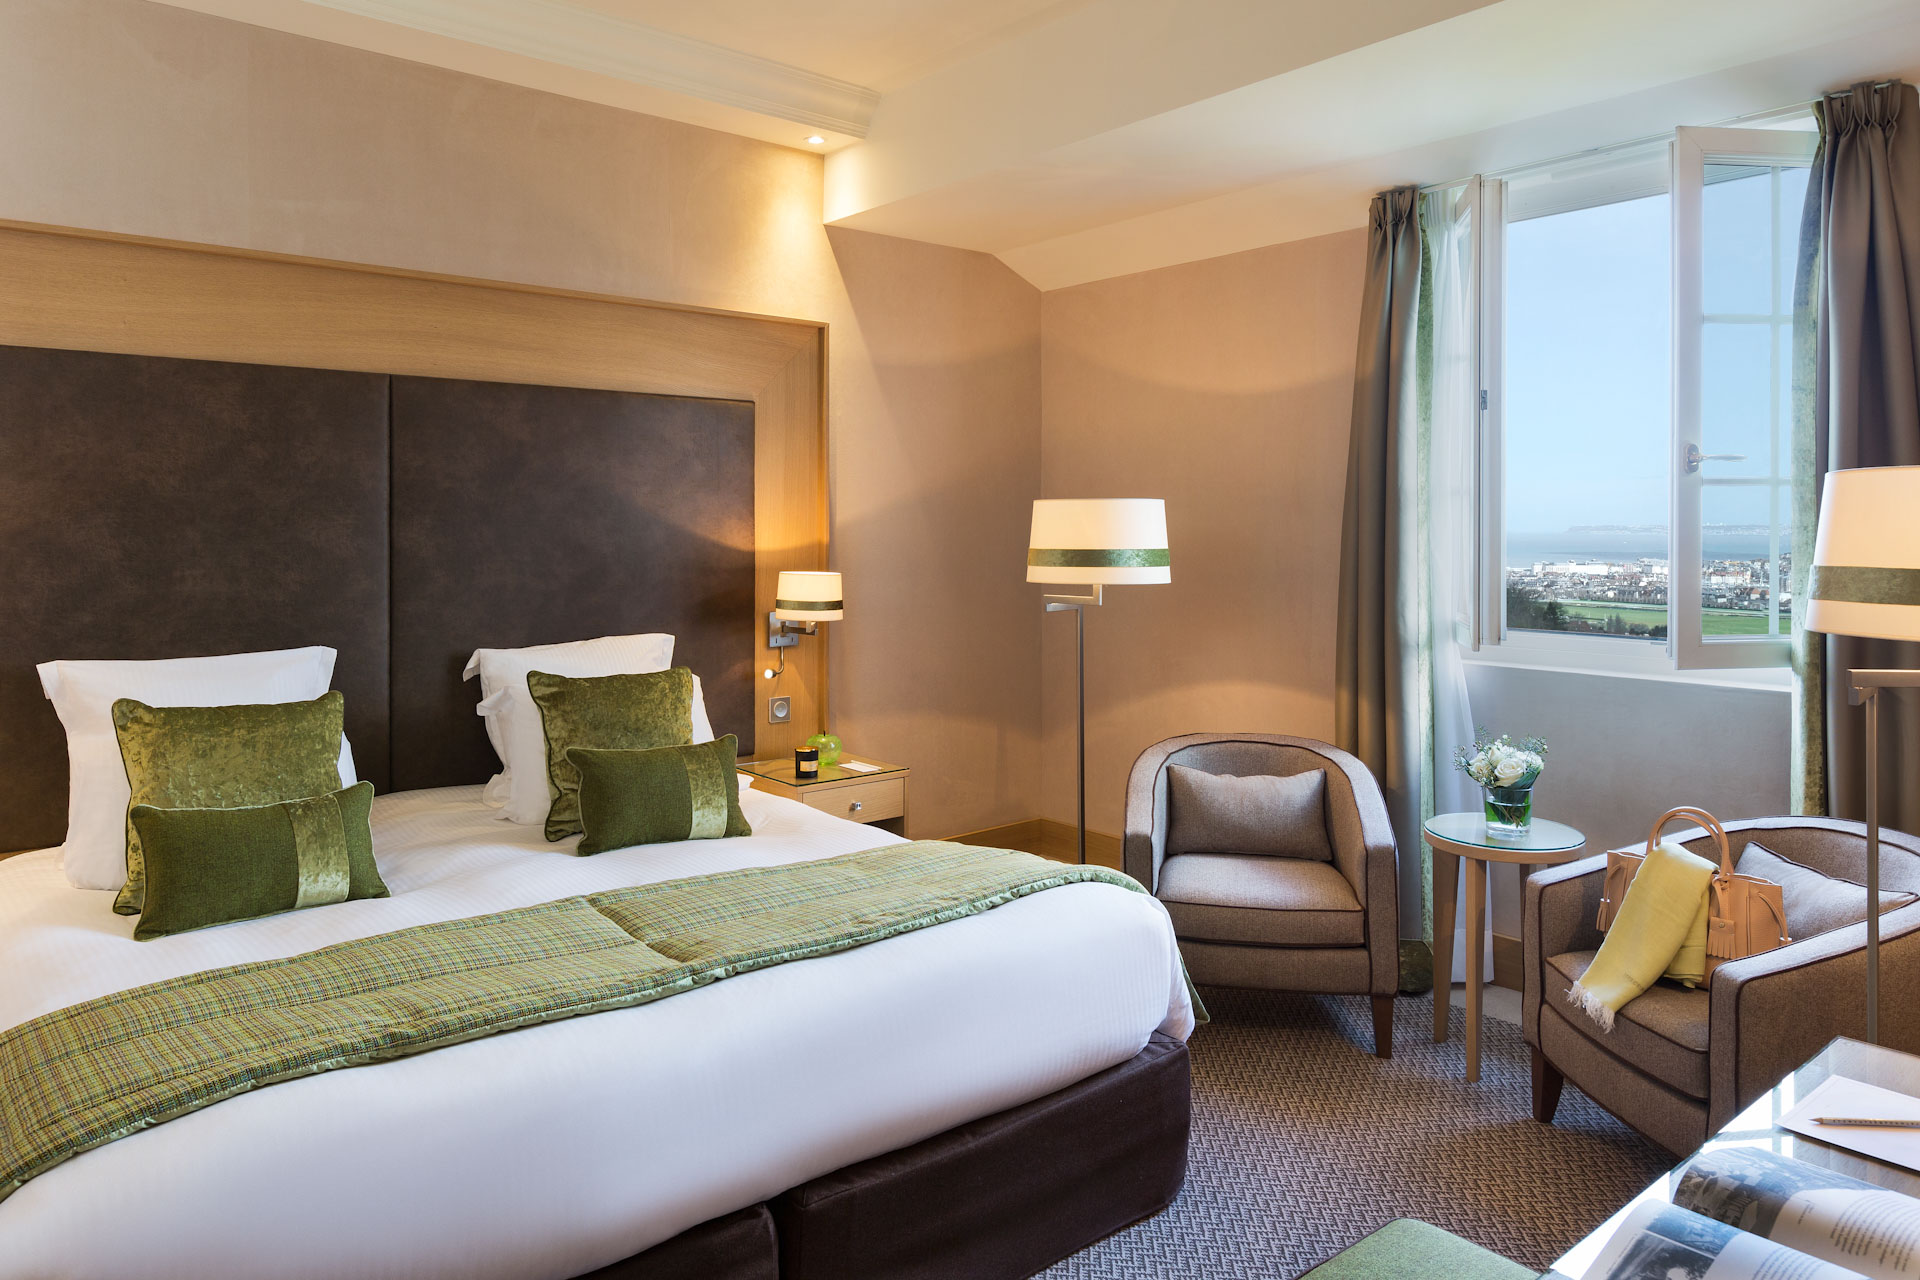 A double bedroom overlooking the golf course at Hotel du Golf Barriere, Deauville, France